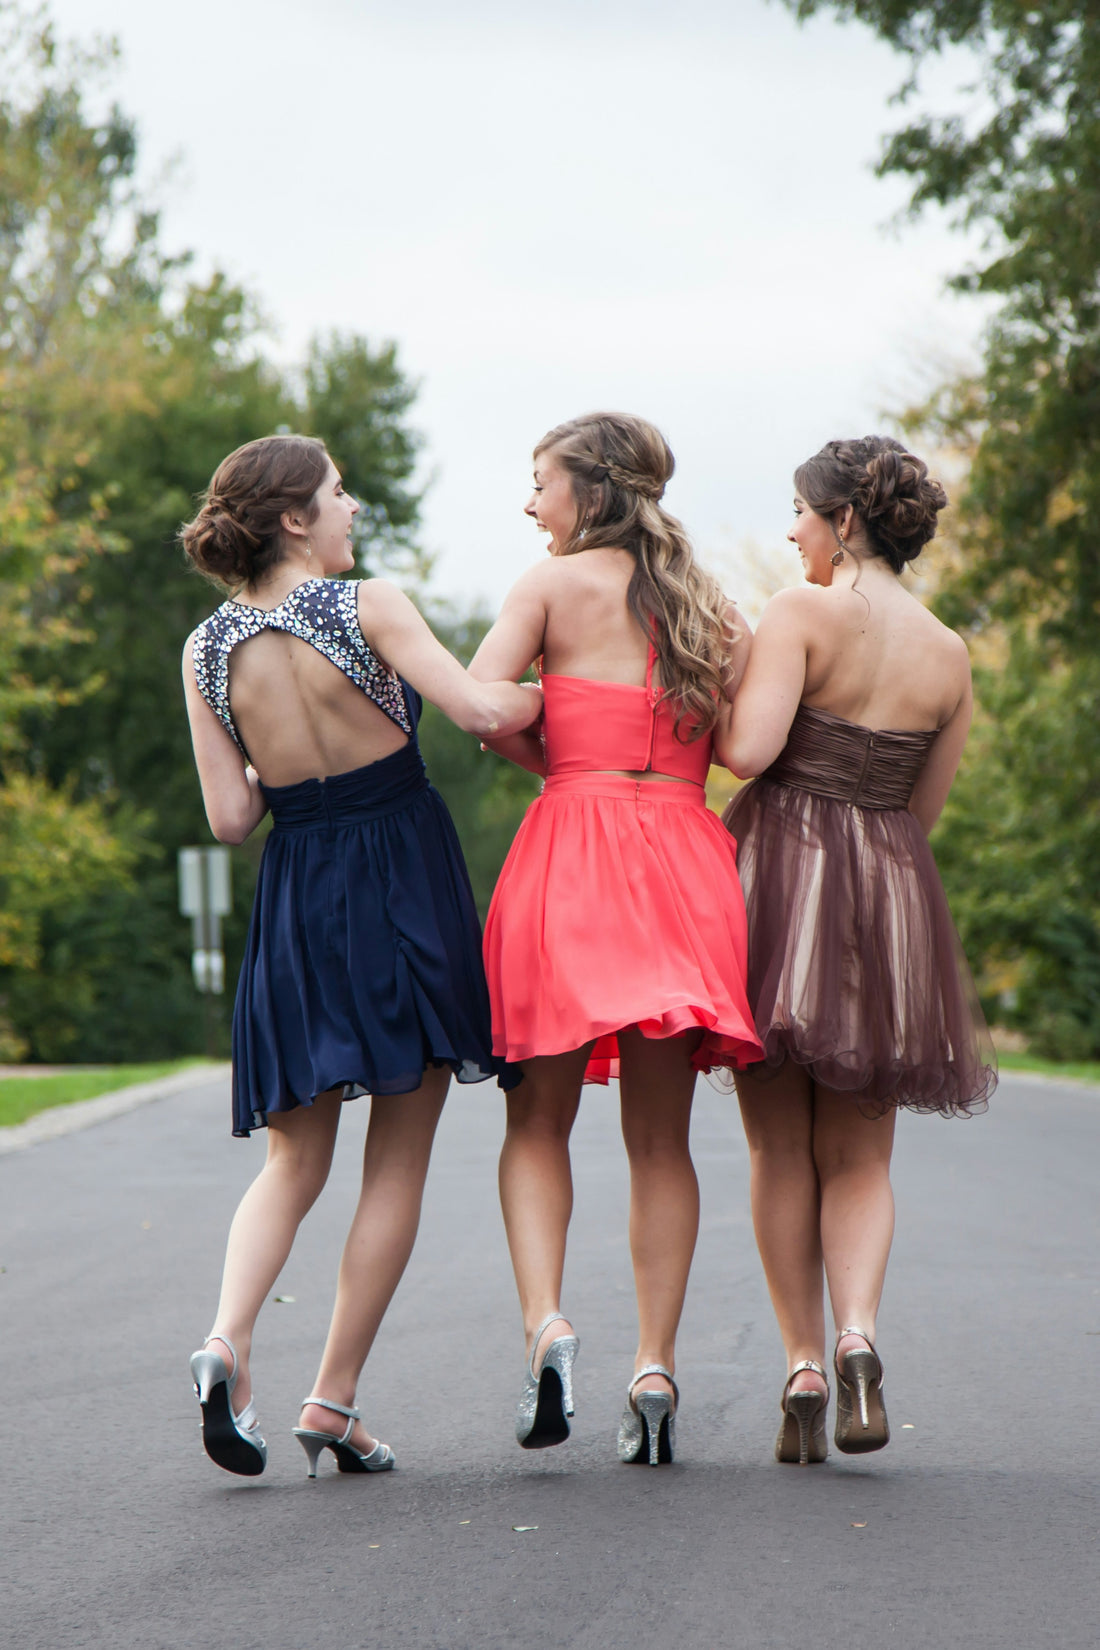 How to Find Affordable Prom Dresses